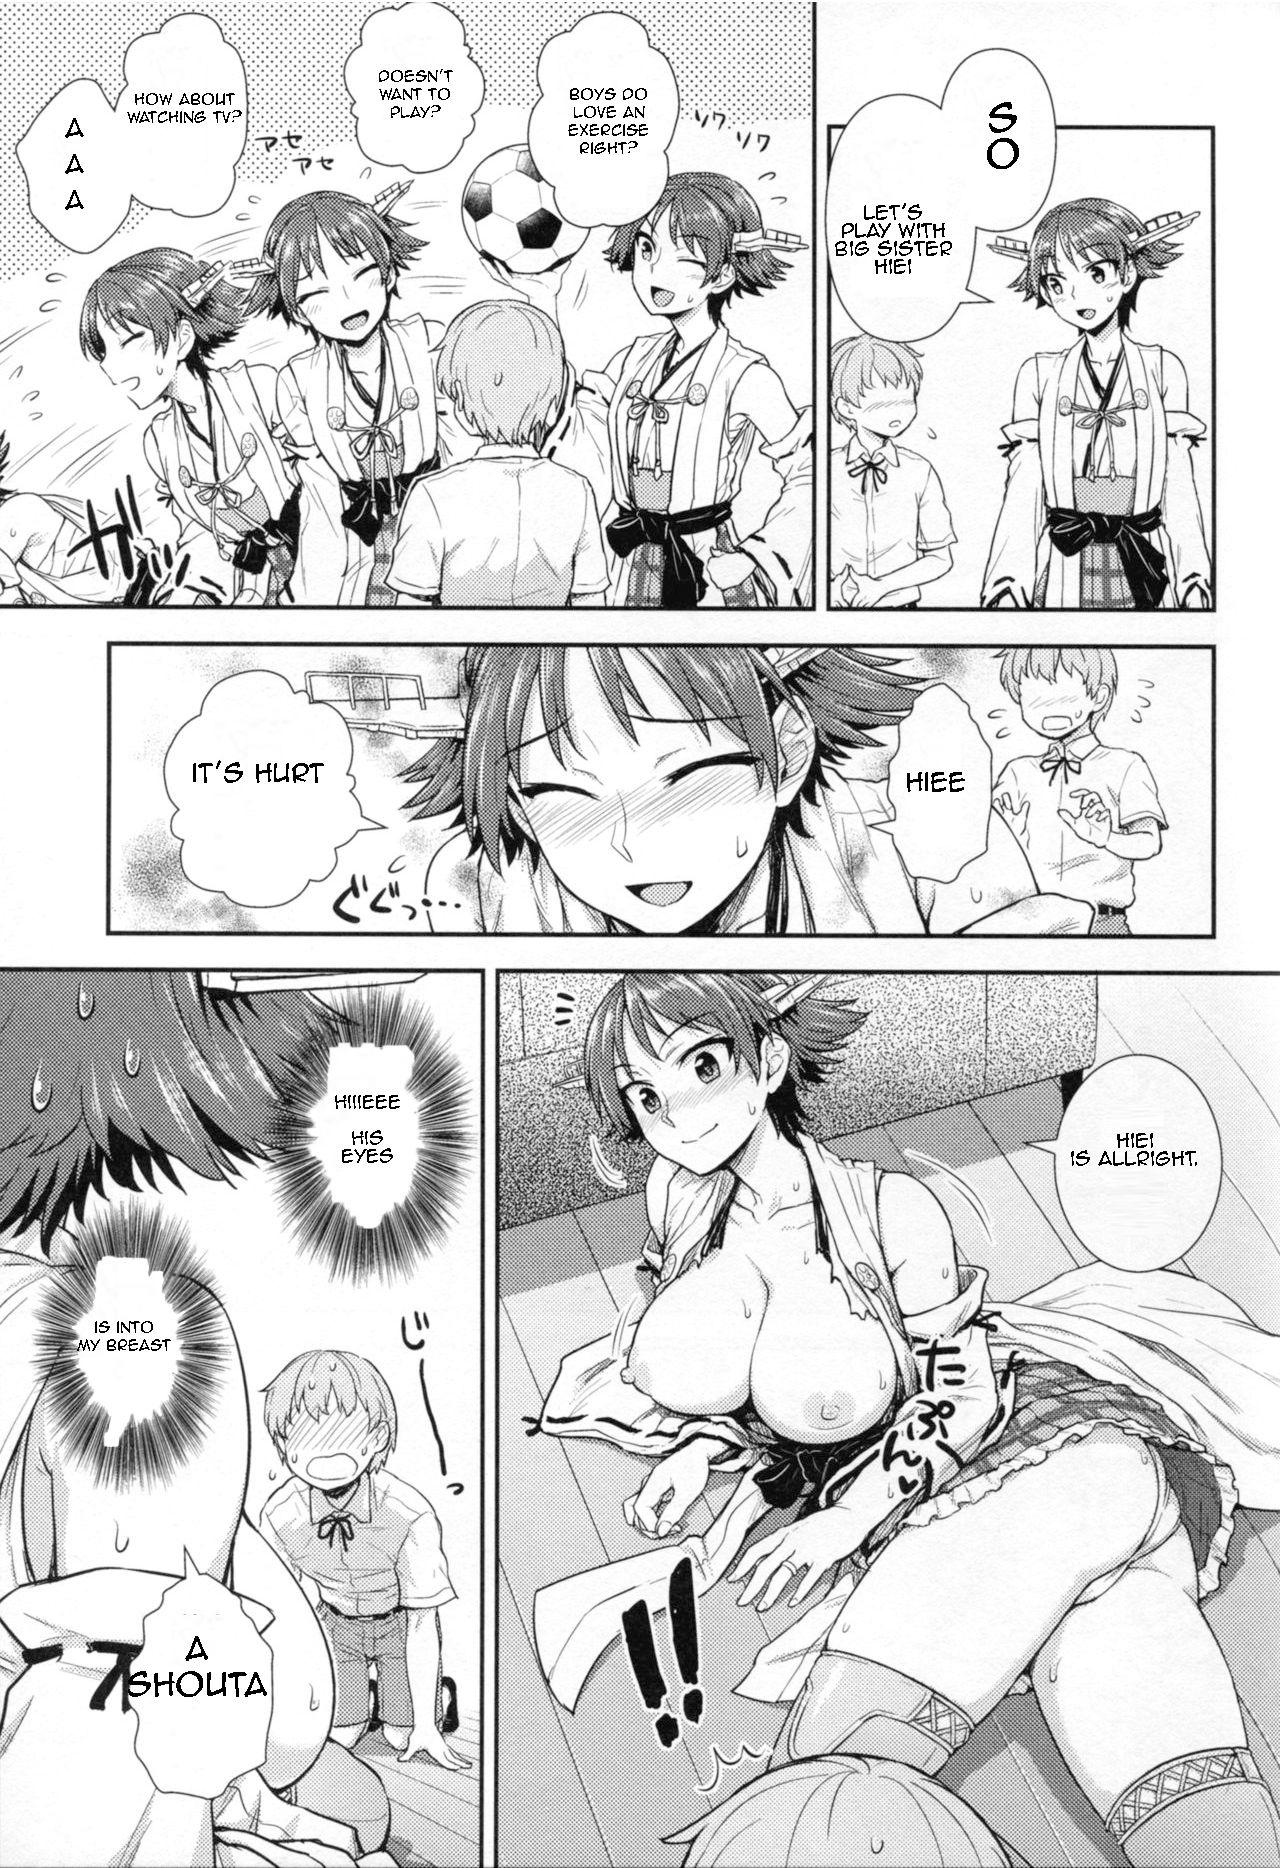 Leave it to HIei! 2